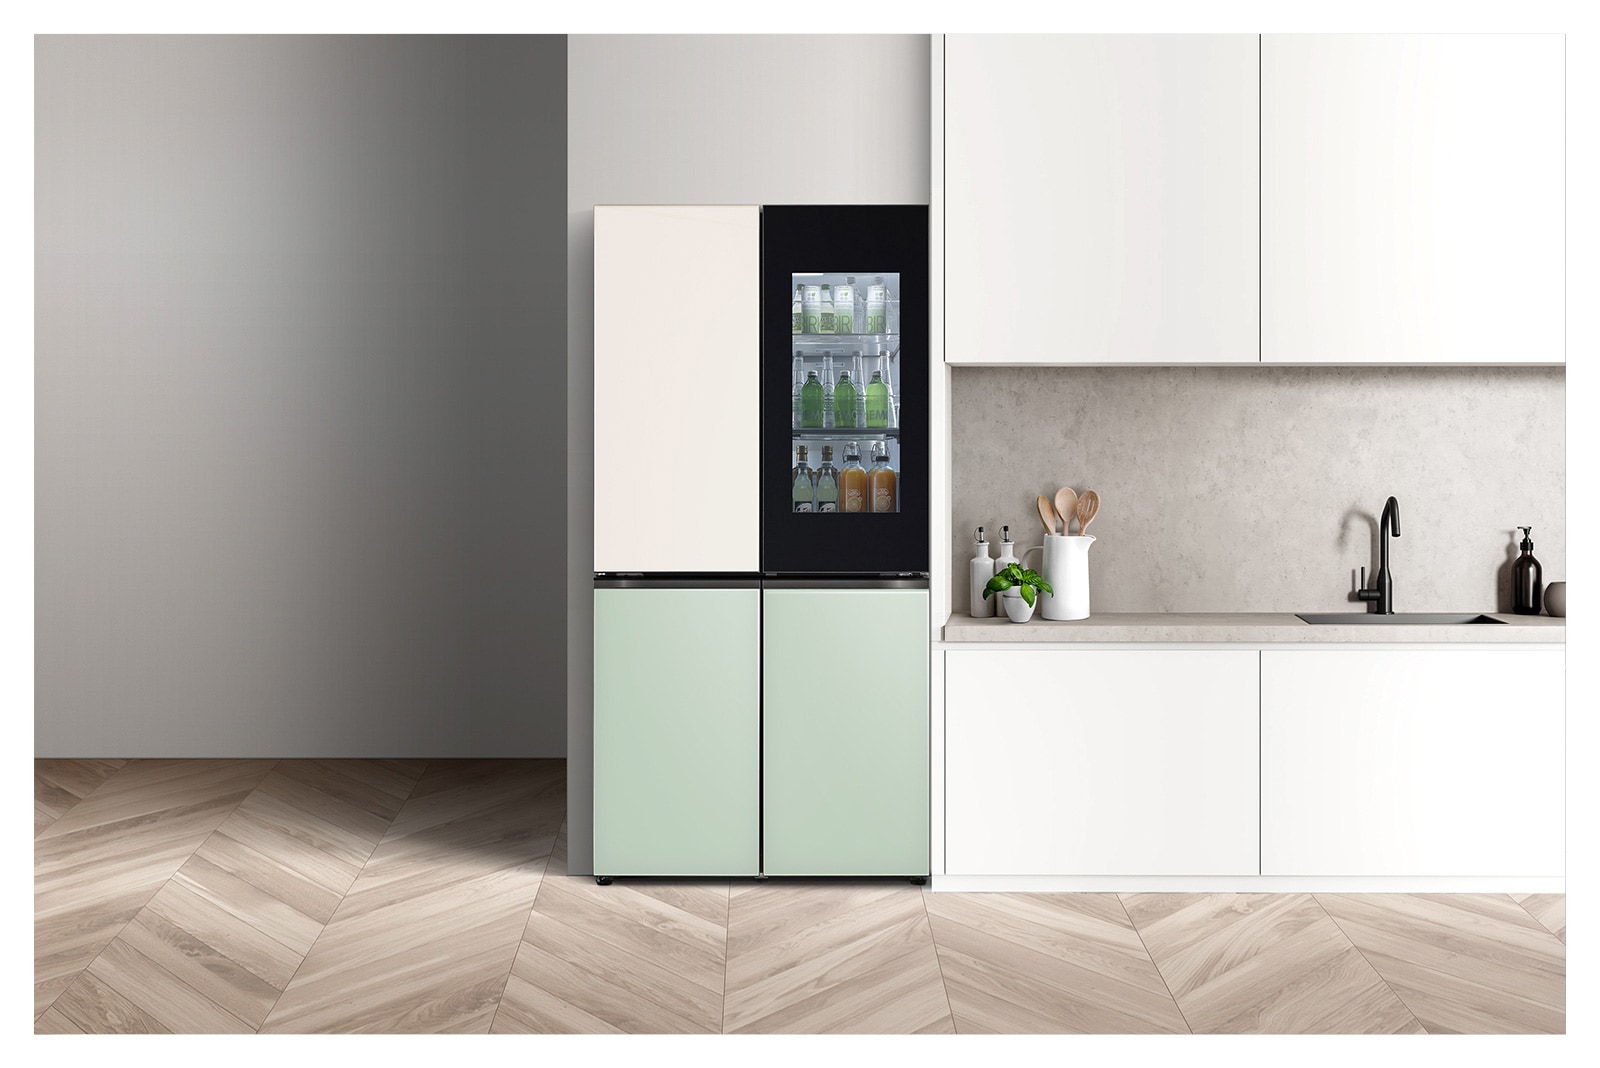 It shows mist mint&silver color LG French Door Objet Collection is placed in a bright-tone modern kitchen.